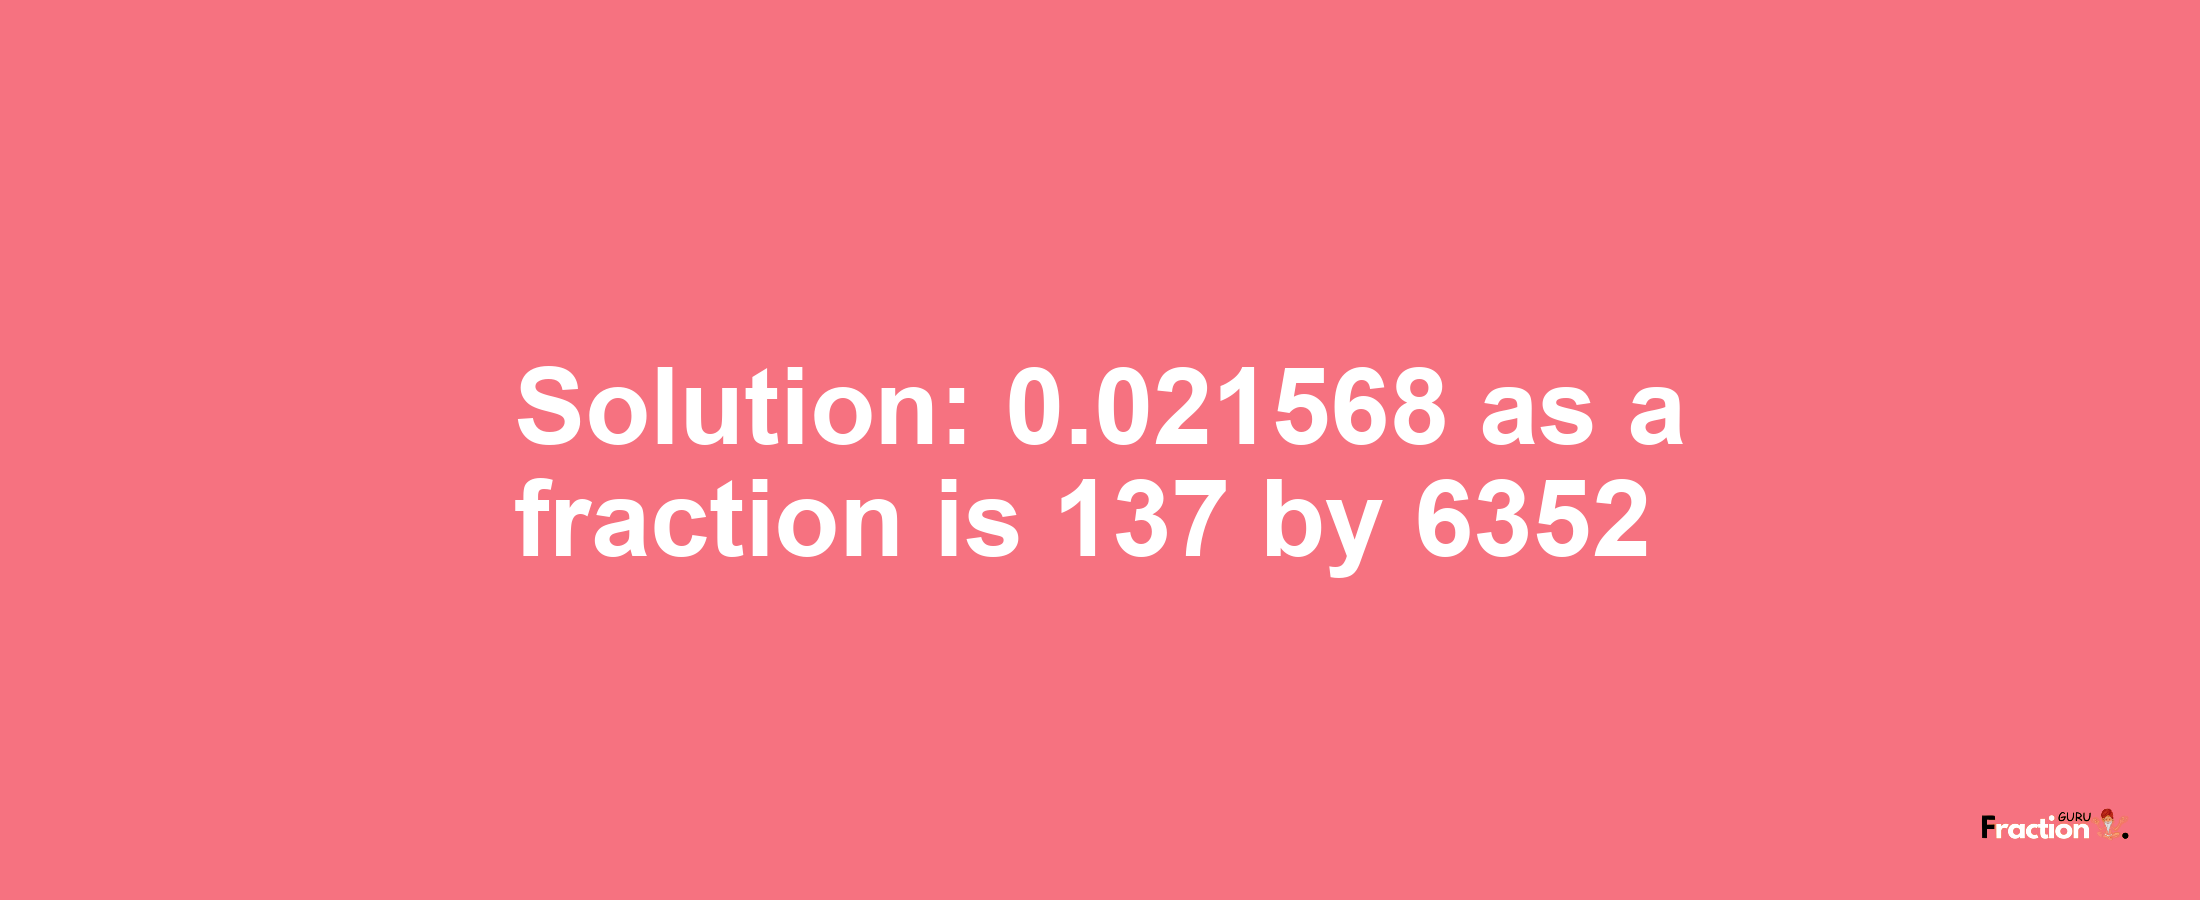 Solution:0.021568 as a fraction is 137/6352